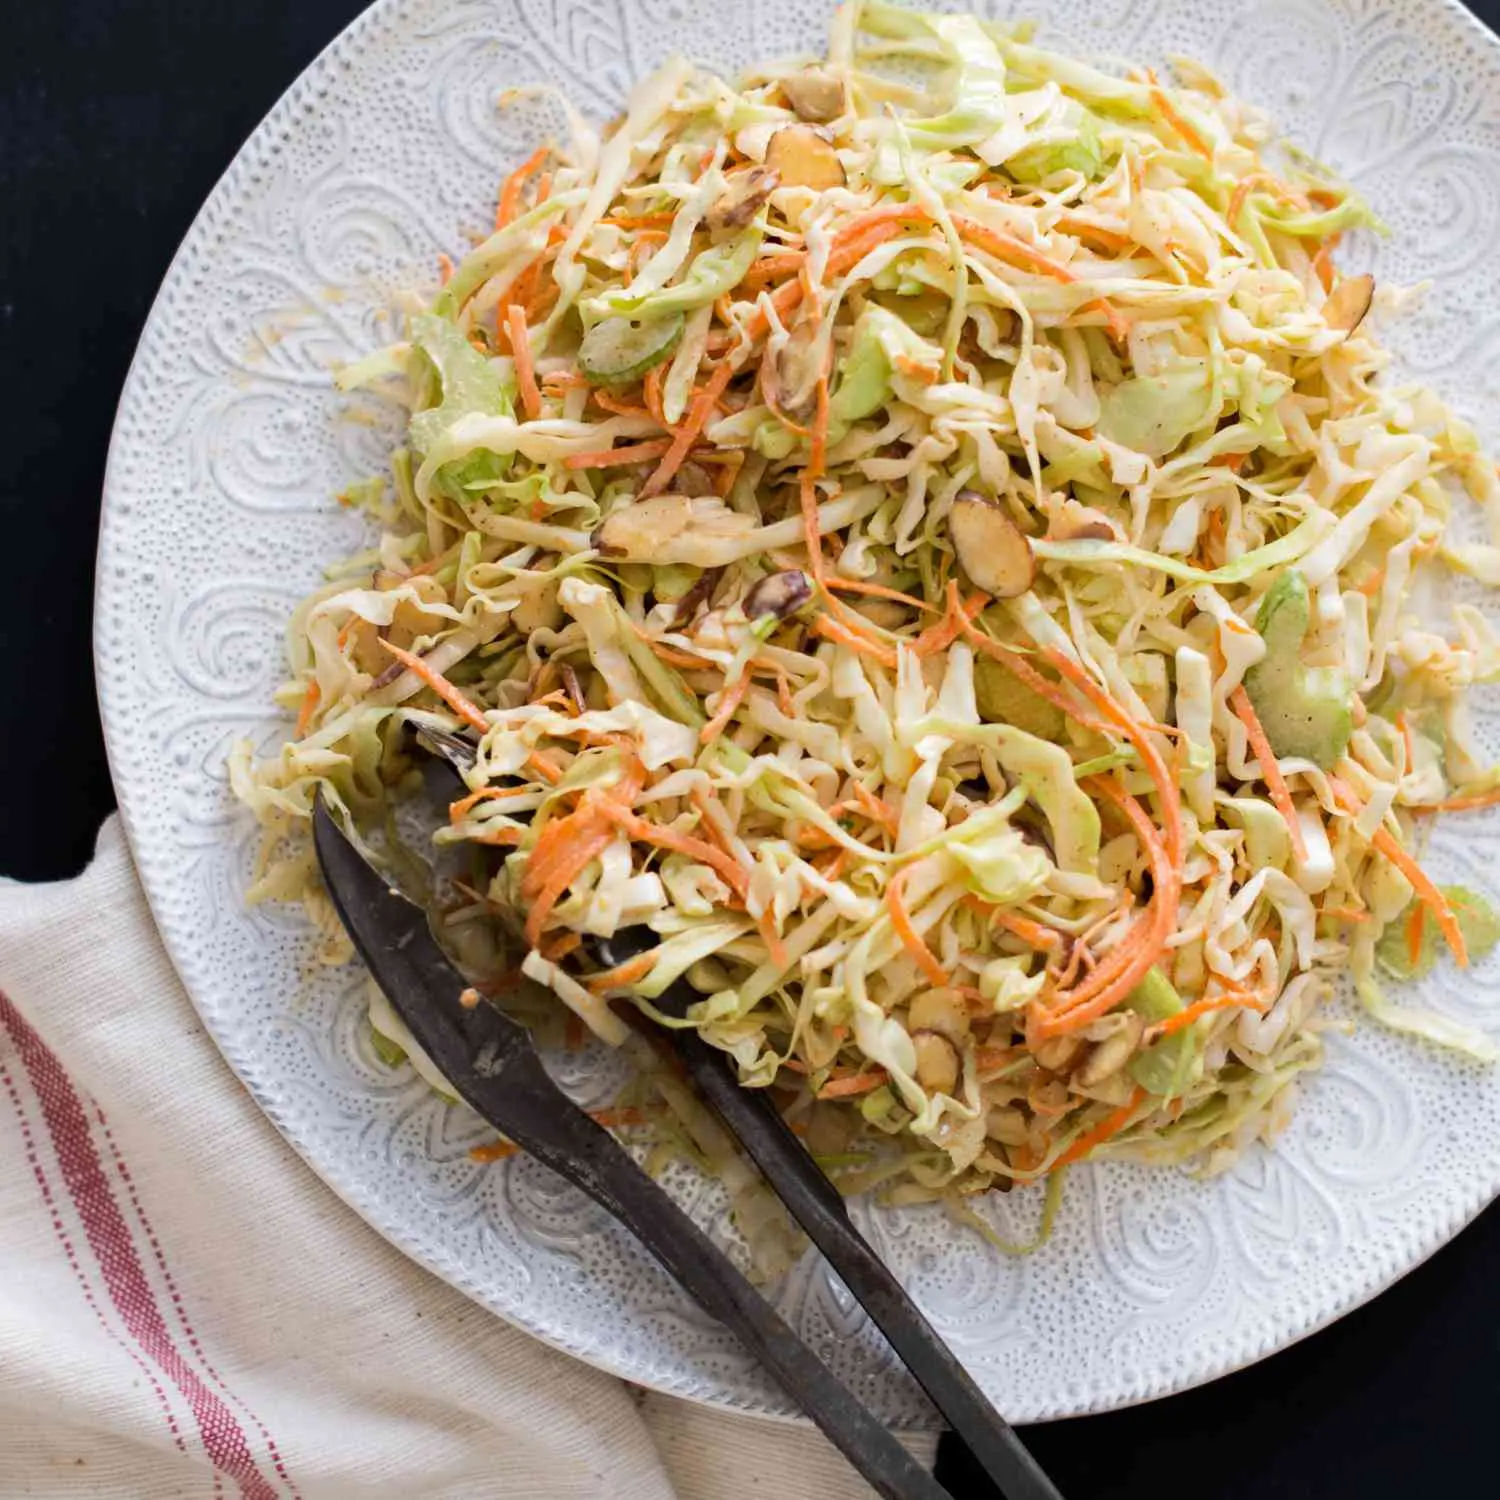 smoked paprika coleslaw - How do you fix coleslaw that is too sweet